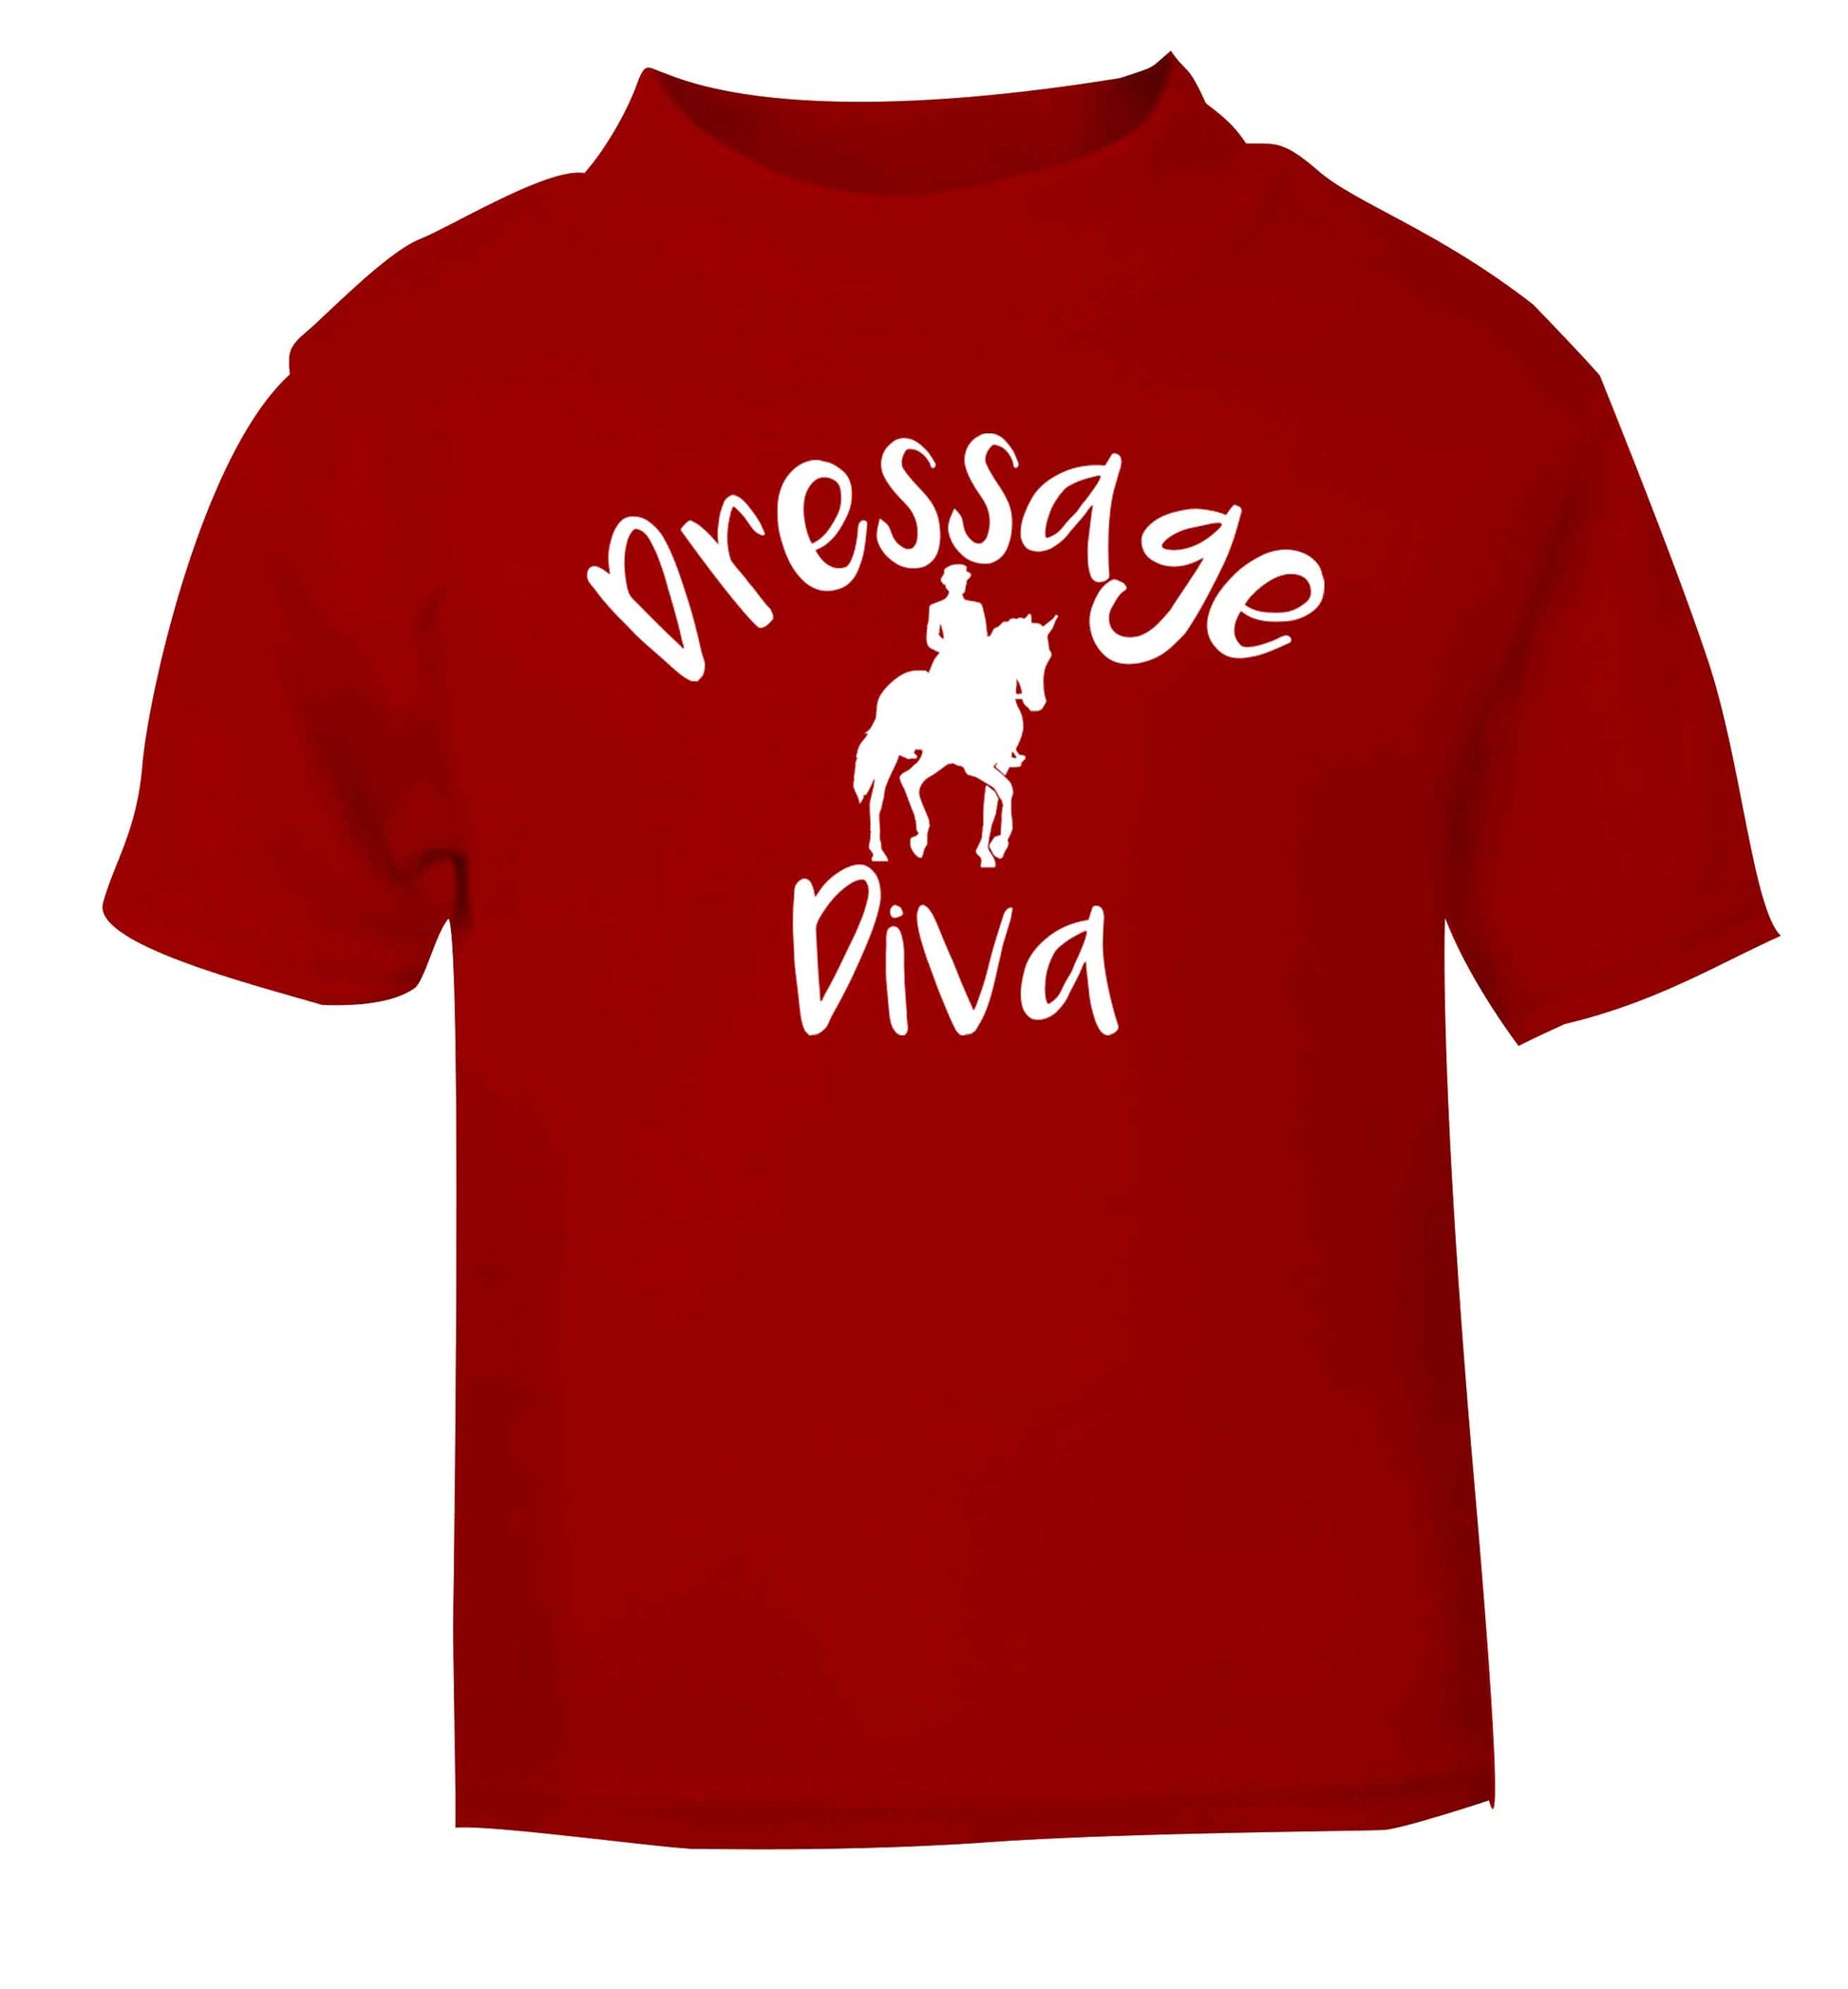 Dressage diva red baby toddler Tshirt 2 Years